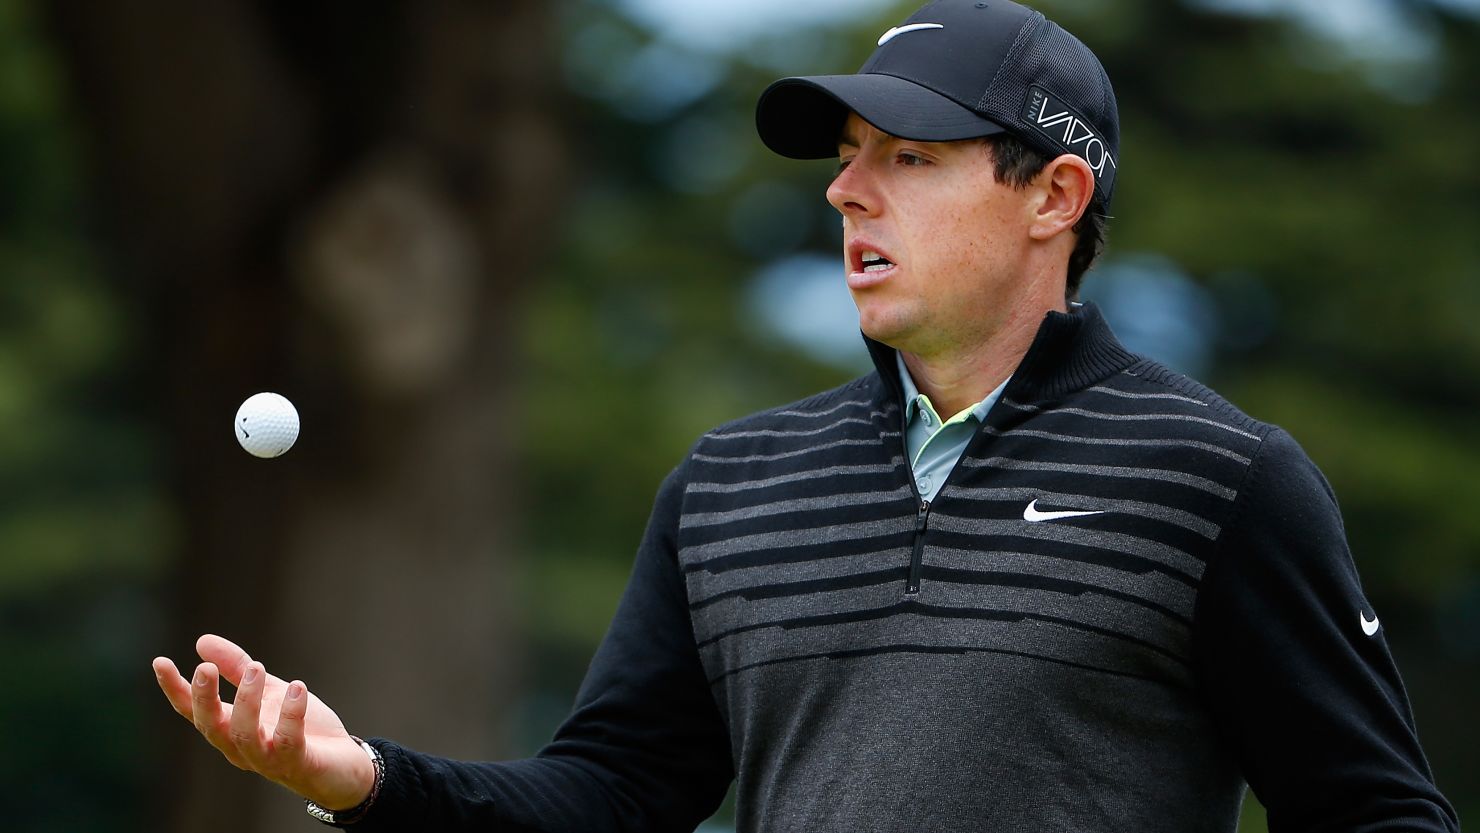  Rory McIlroy defeated American Gary Woodland 4&2 in Sunday's final.